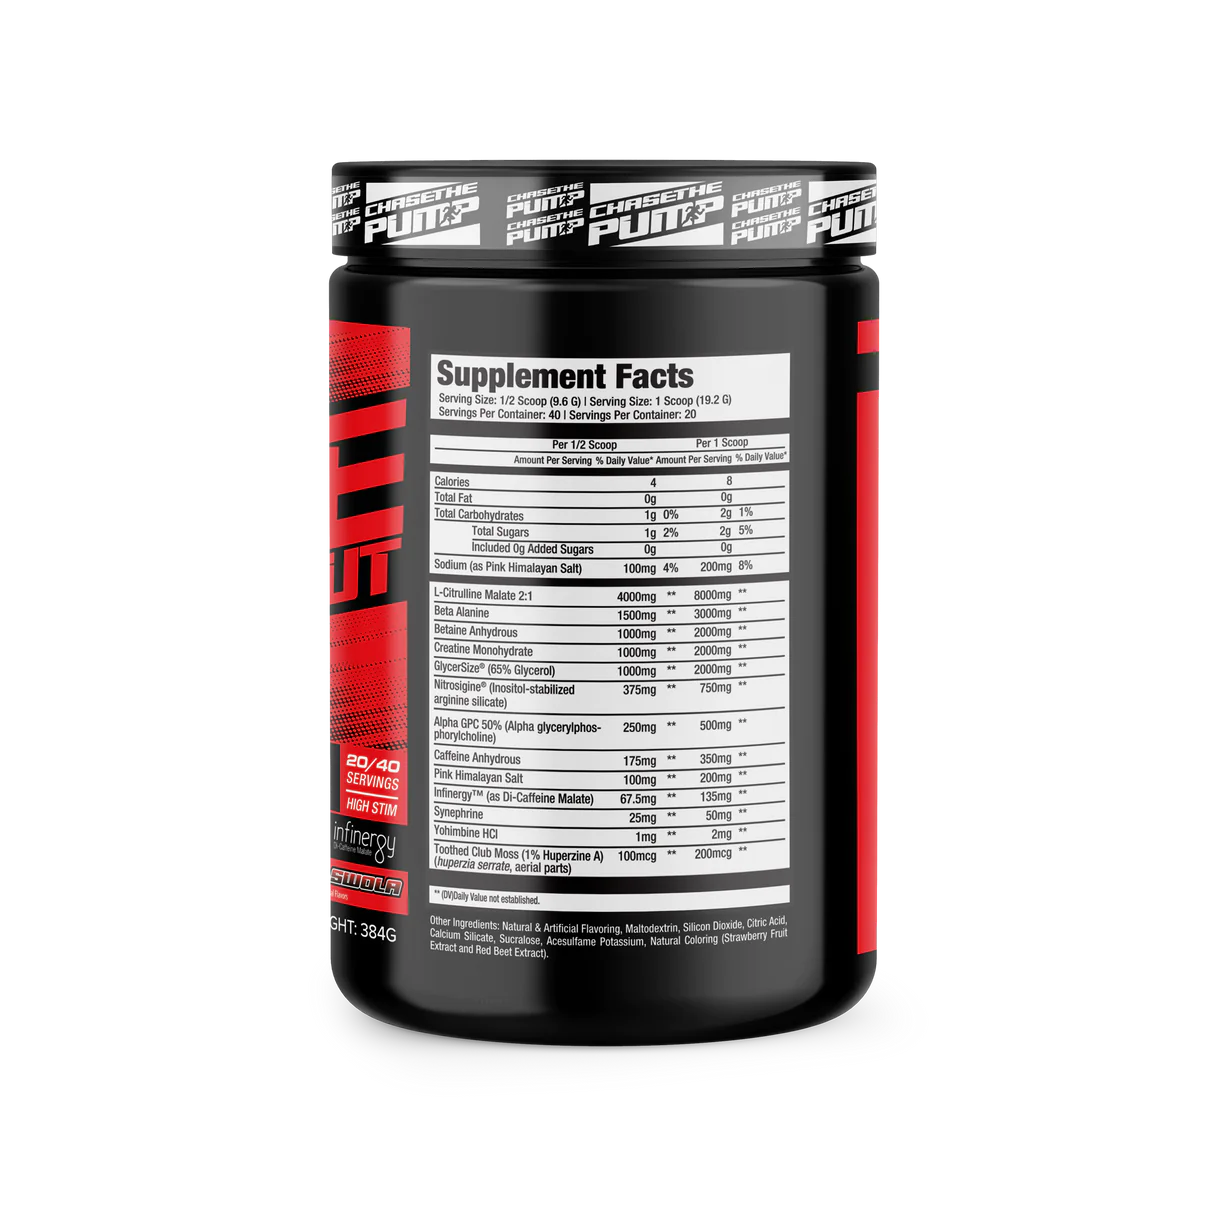 Chase The Pump | Fully Loaded Preworkout Chase The Pump $49.99